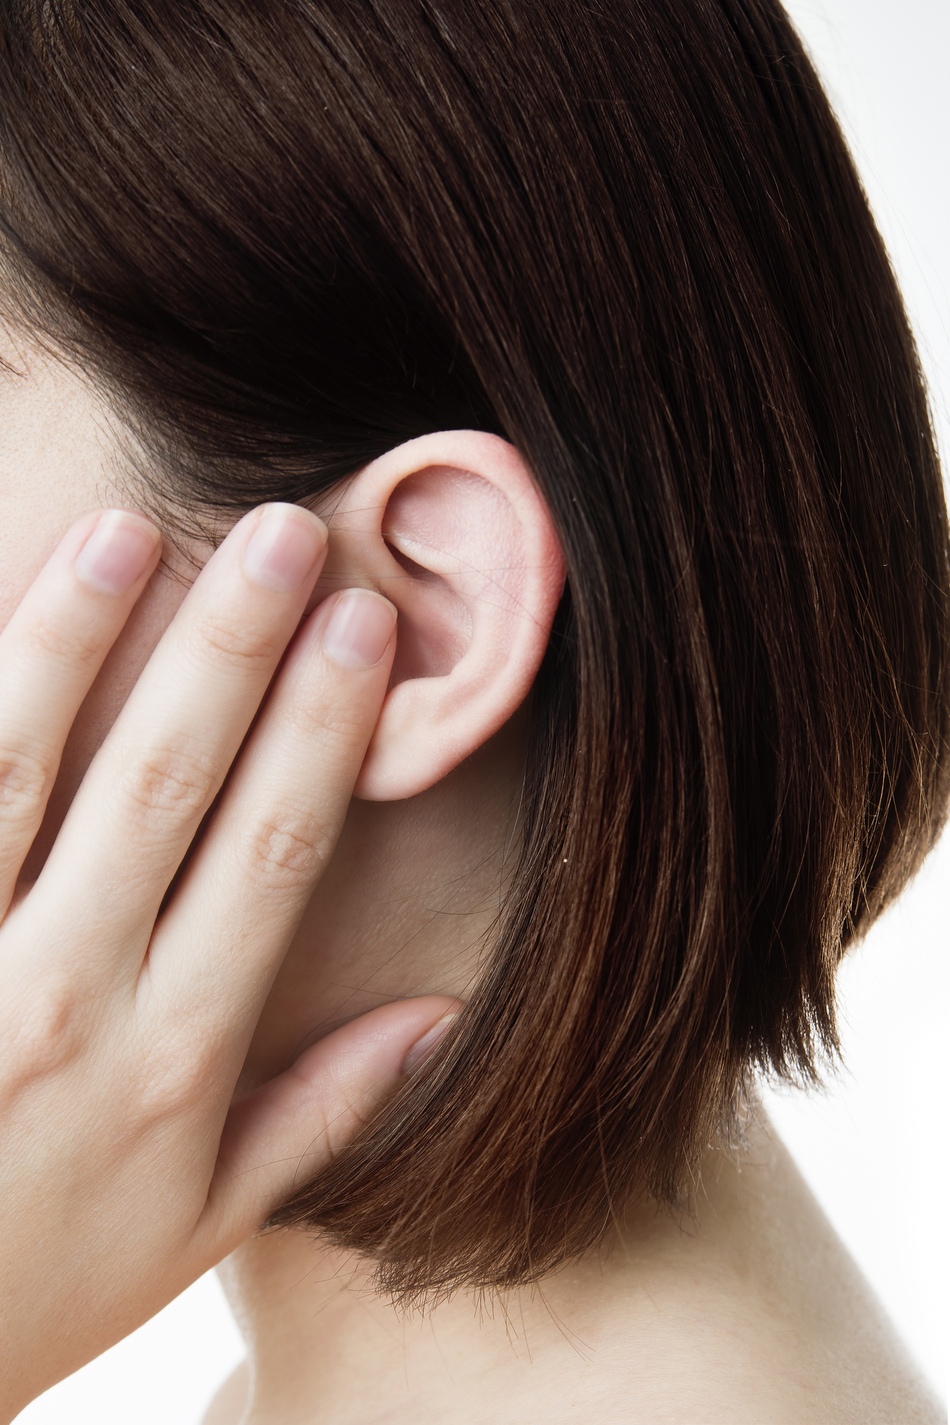 What Are Ringing Ears Really A Sign Of?